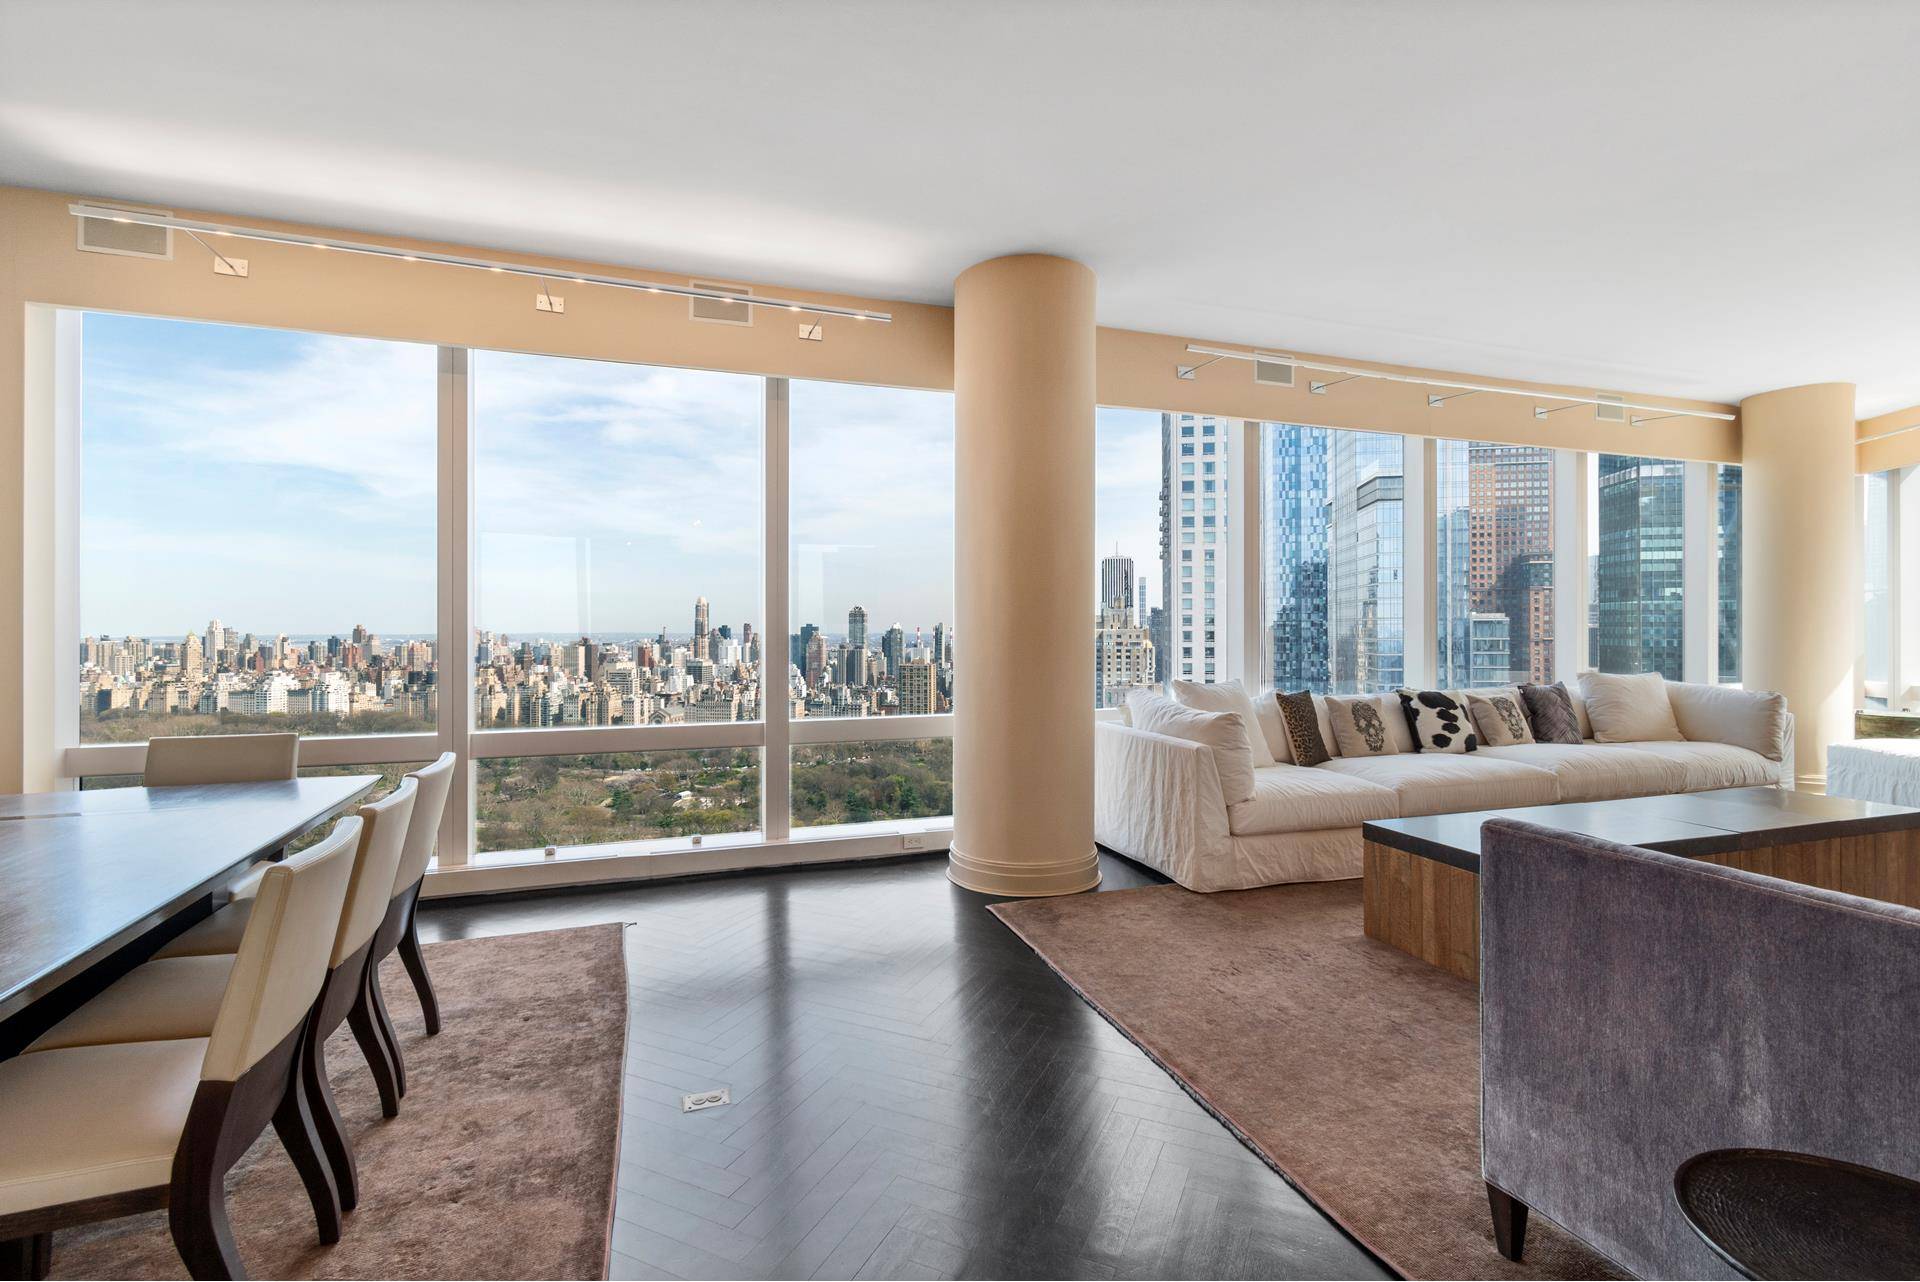 Spectacular CENTRAL PARK View and Serene Hudson River View, open City landscapes from floor to ceiling windows.